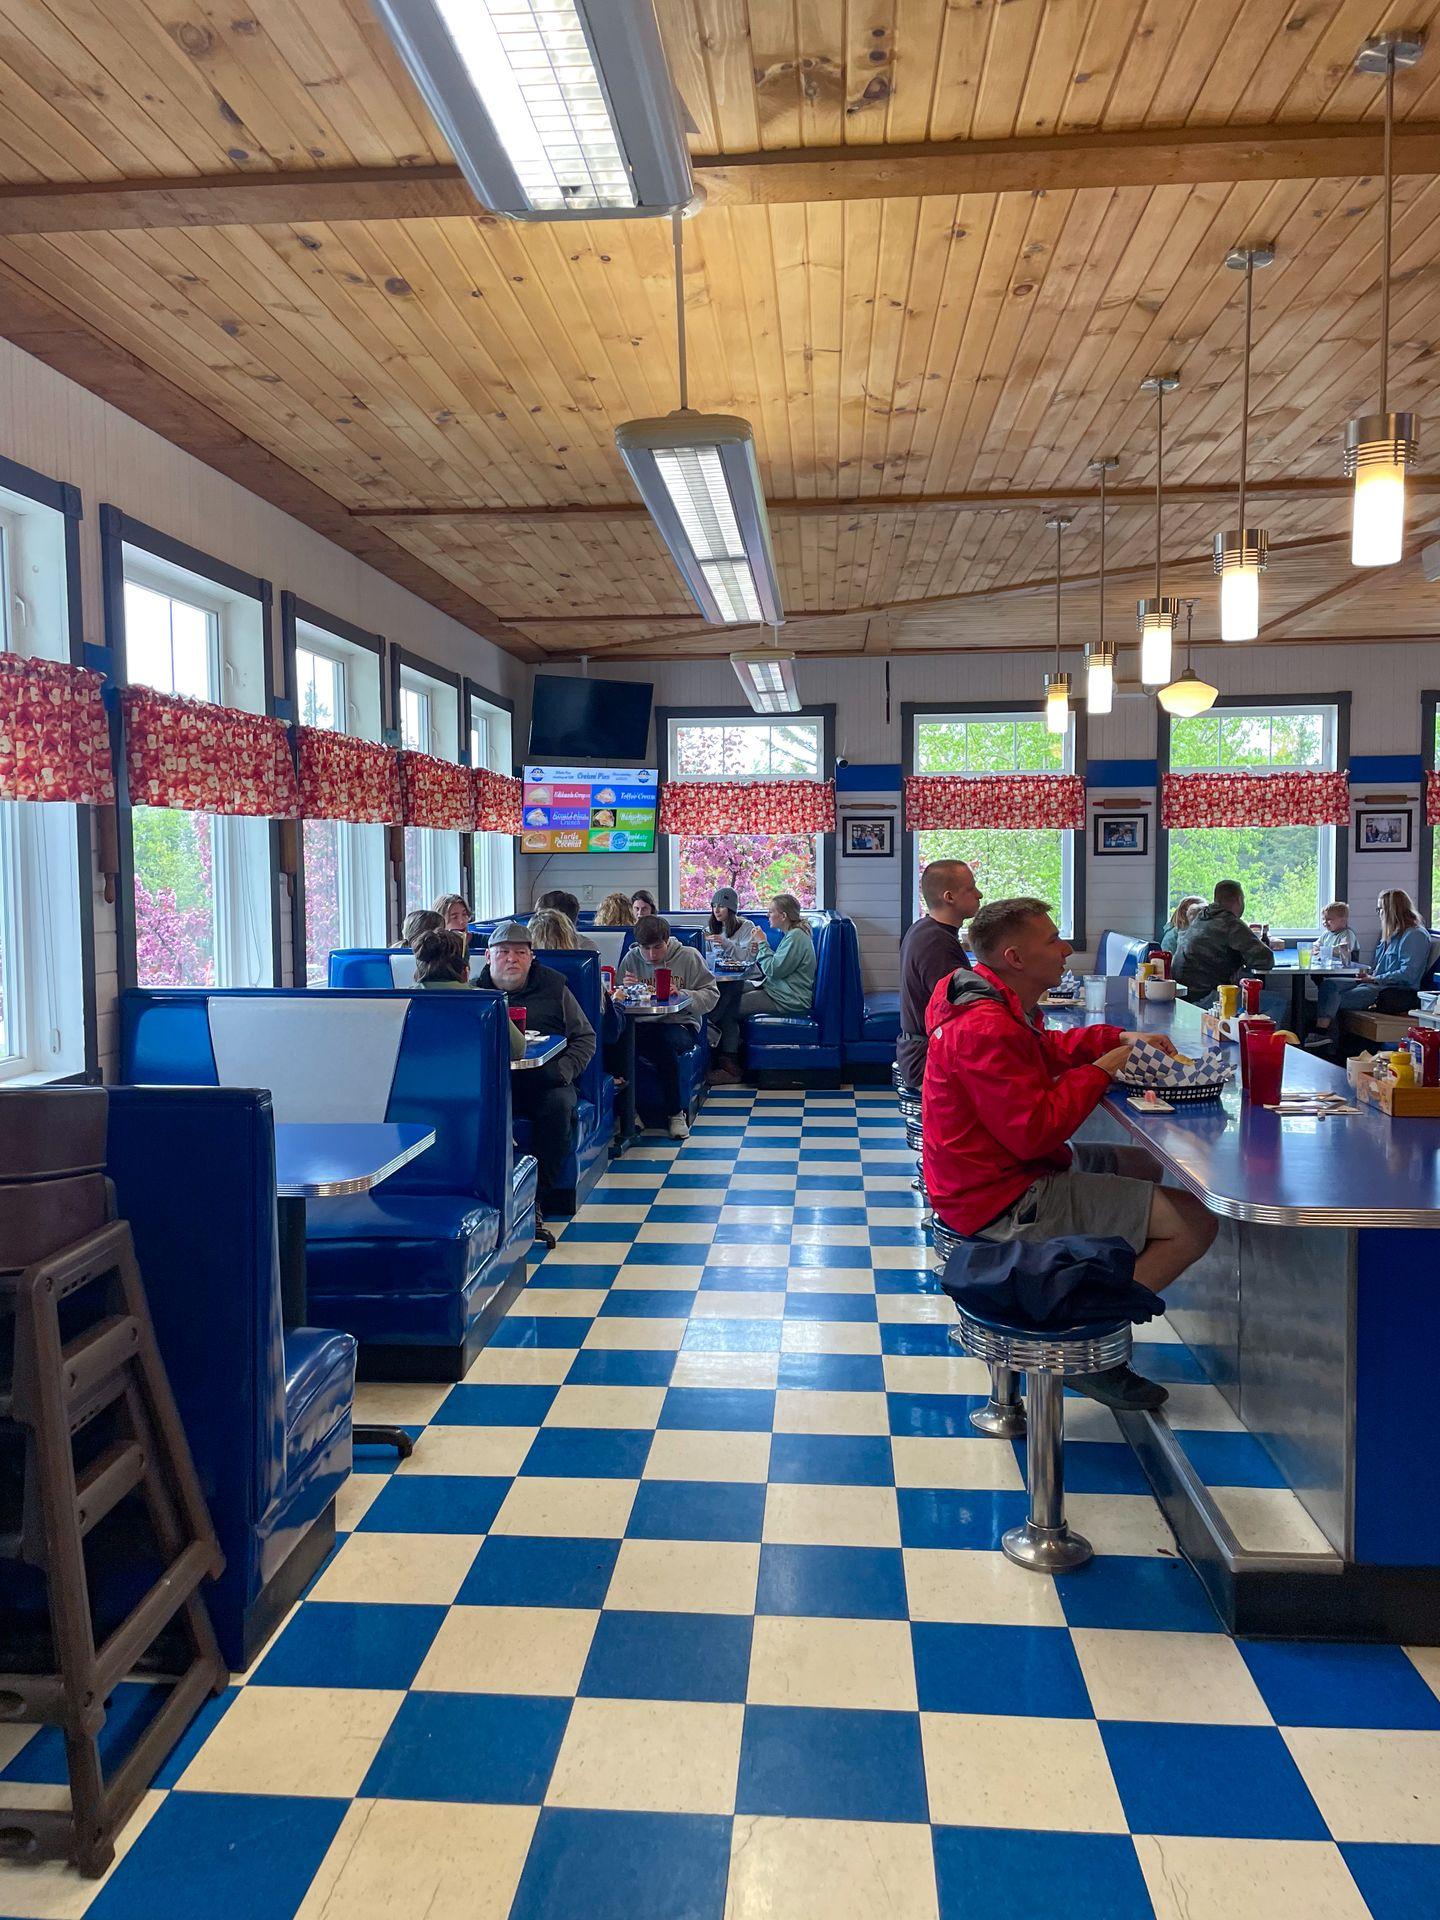 The interior of Betty's Pies, which features a blue and white checkerboard floor and blue booths.